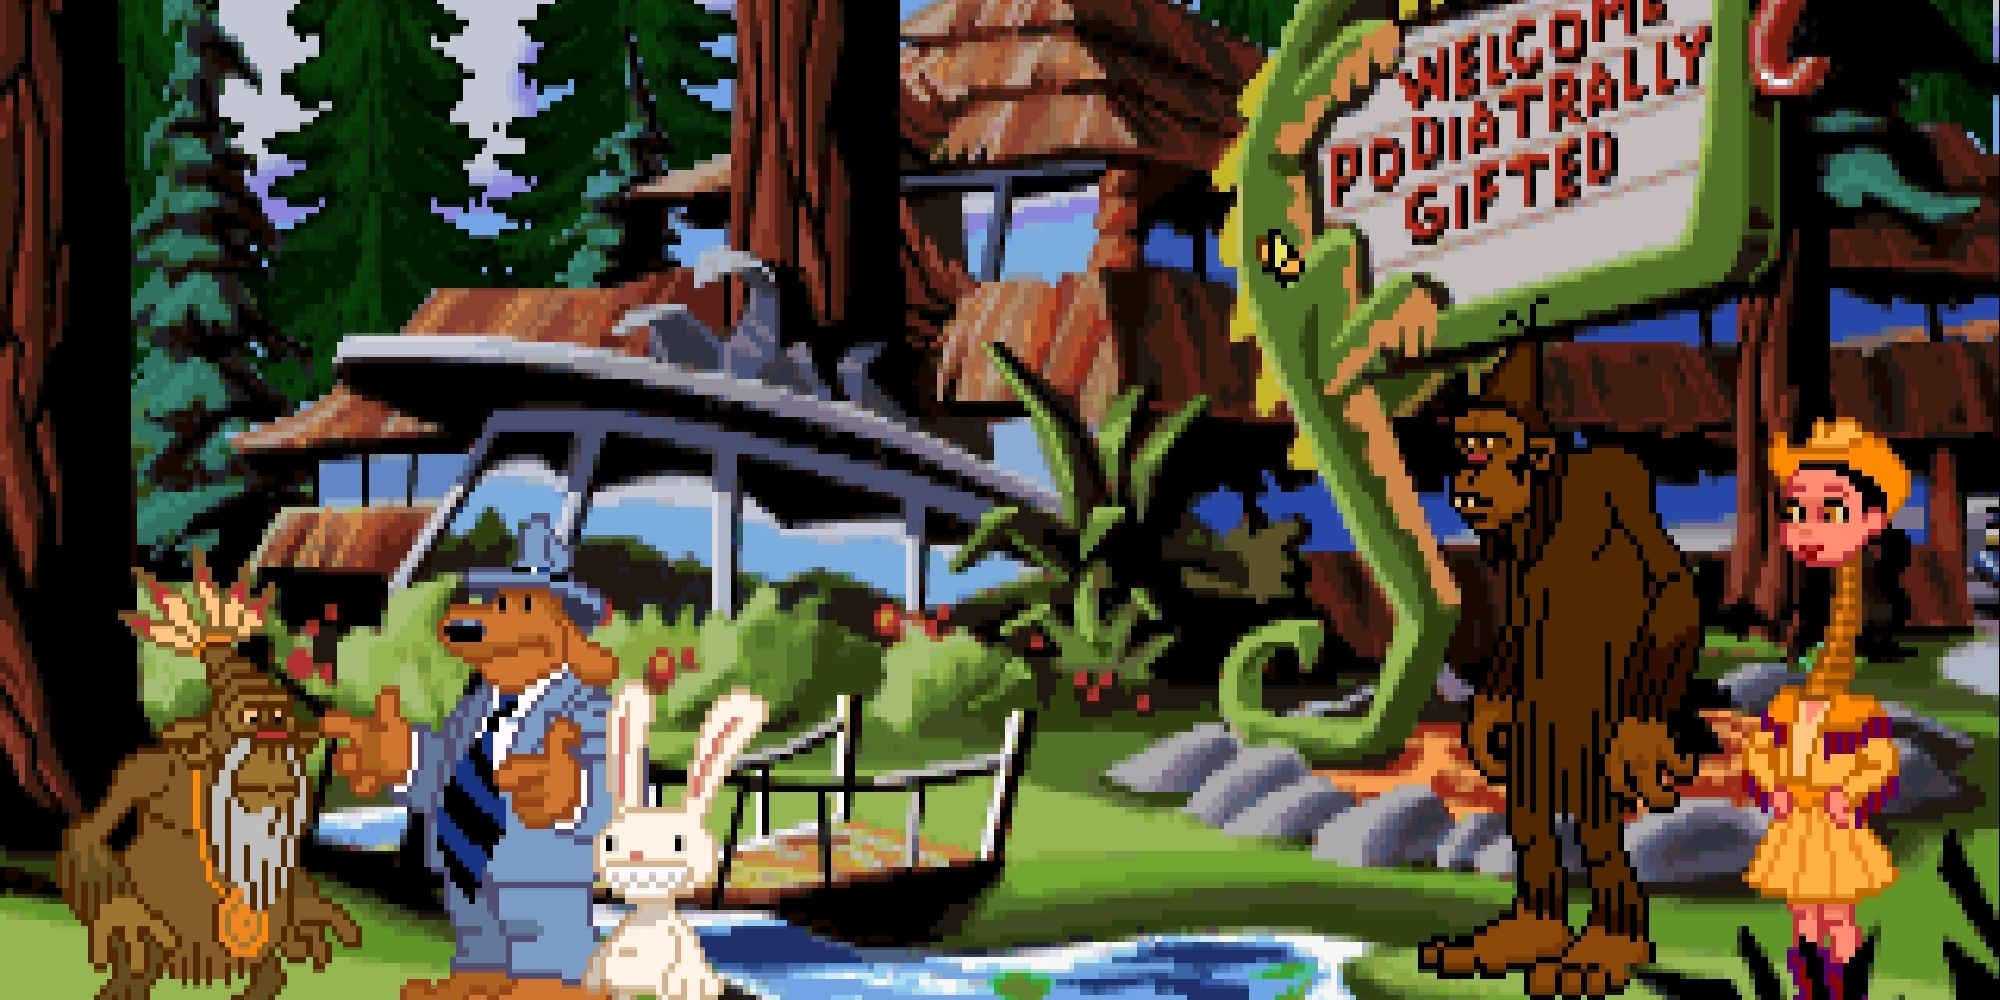 A screenshot from LucasArts' Sam & Max Hit The Road, showing Sam and Max talking to a monkey in front of an inn